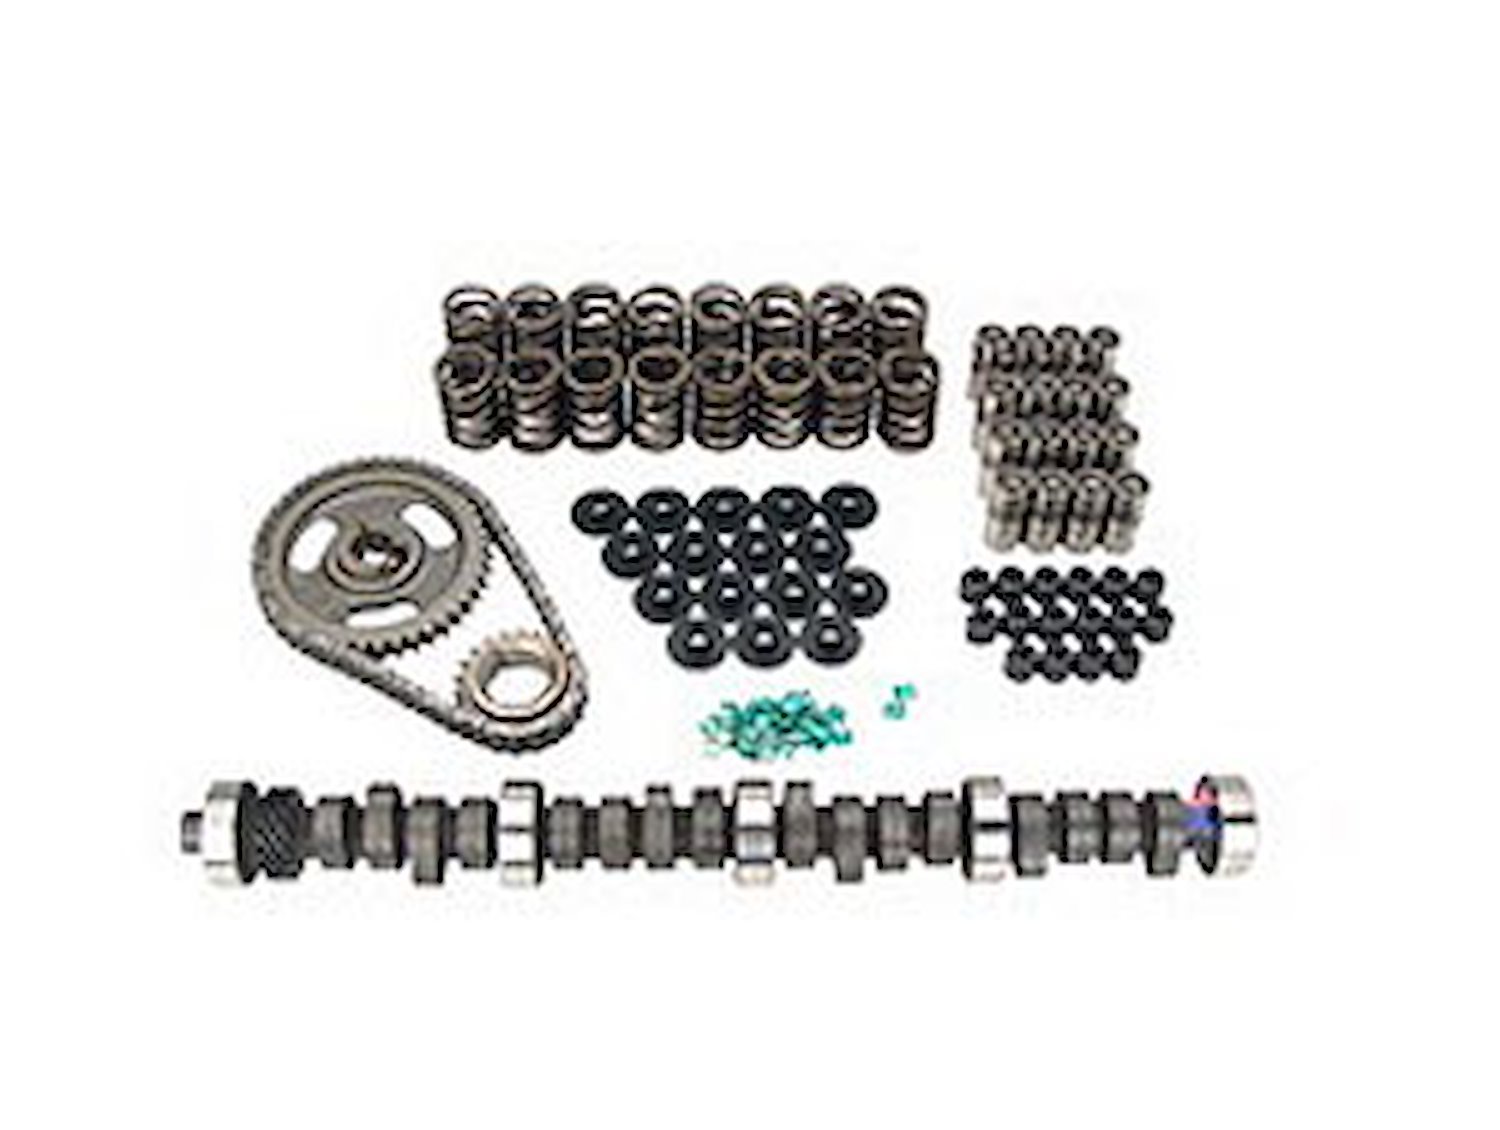 Mutha" Thumpr Hydraulic Flat Tappet Camshaft Complete Kit Lift .519"/.503" Duration 286/304 RPM Range 2200-6100